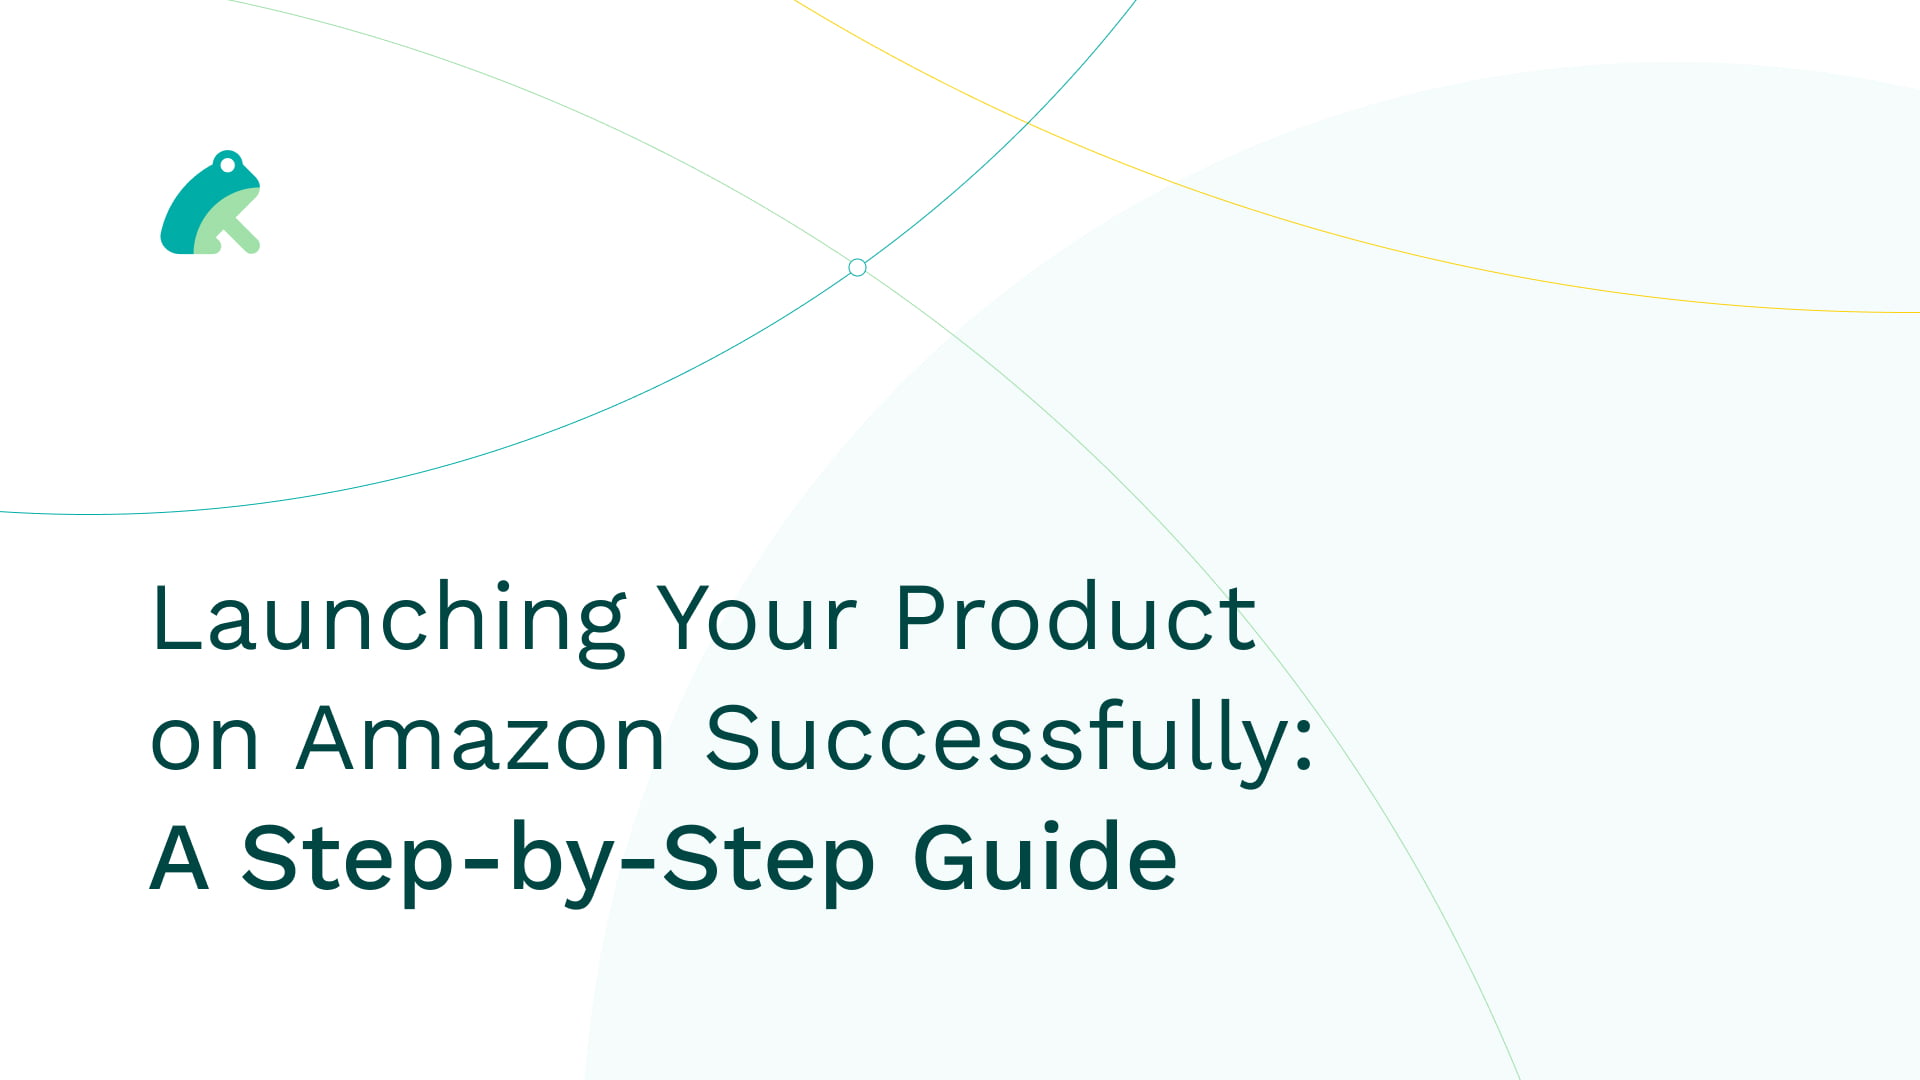 Launching Your Product on Amazon Successfully: A Step-by-Step Guide